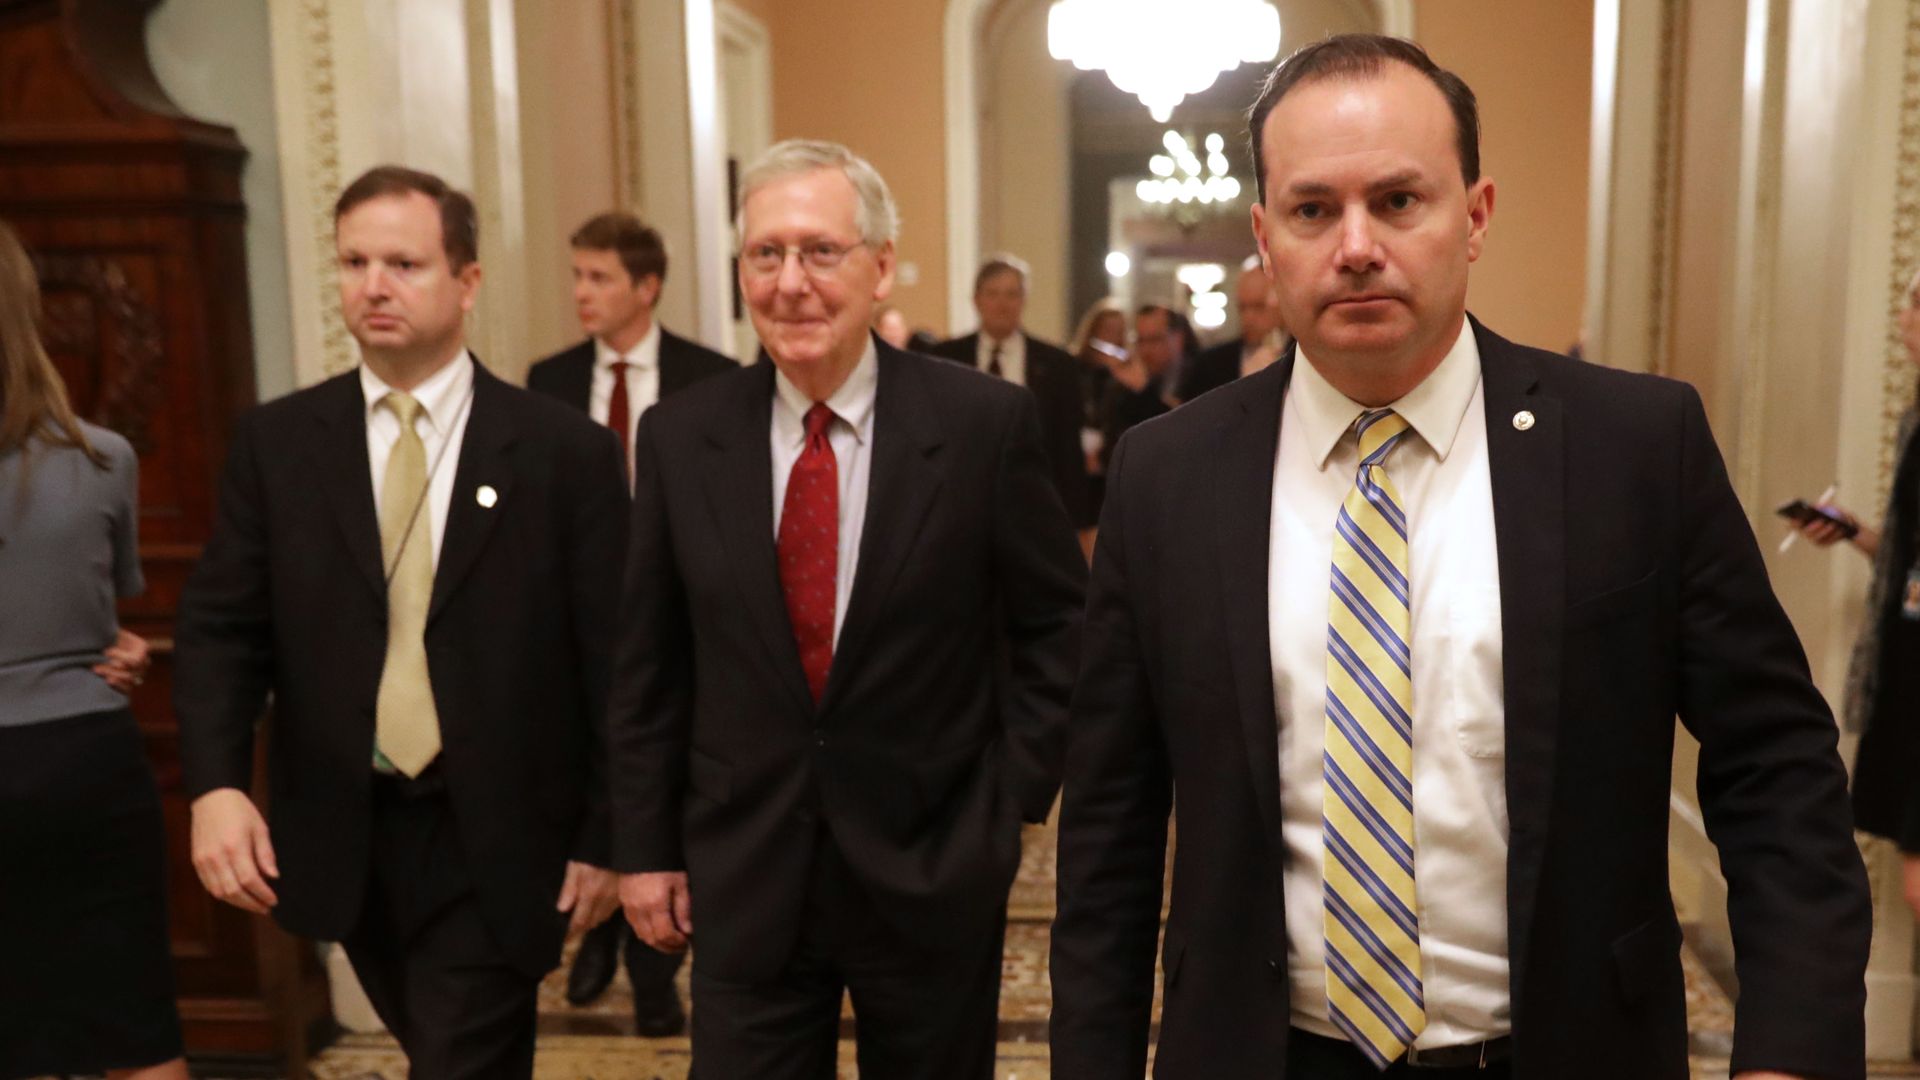 Mitch McConnell and Mike Lee walk.